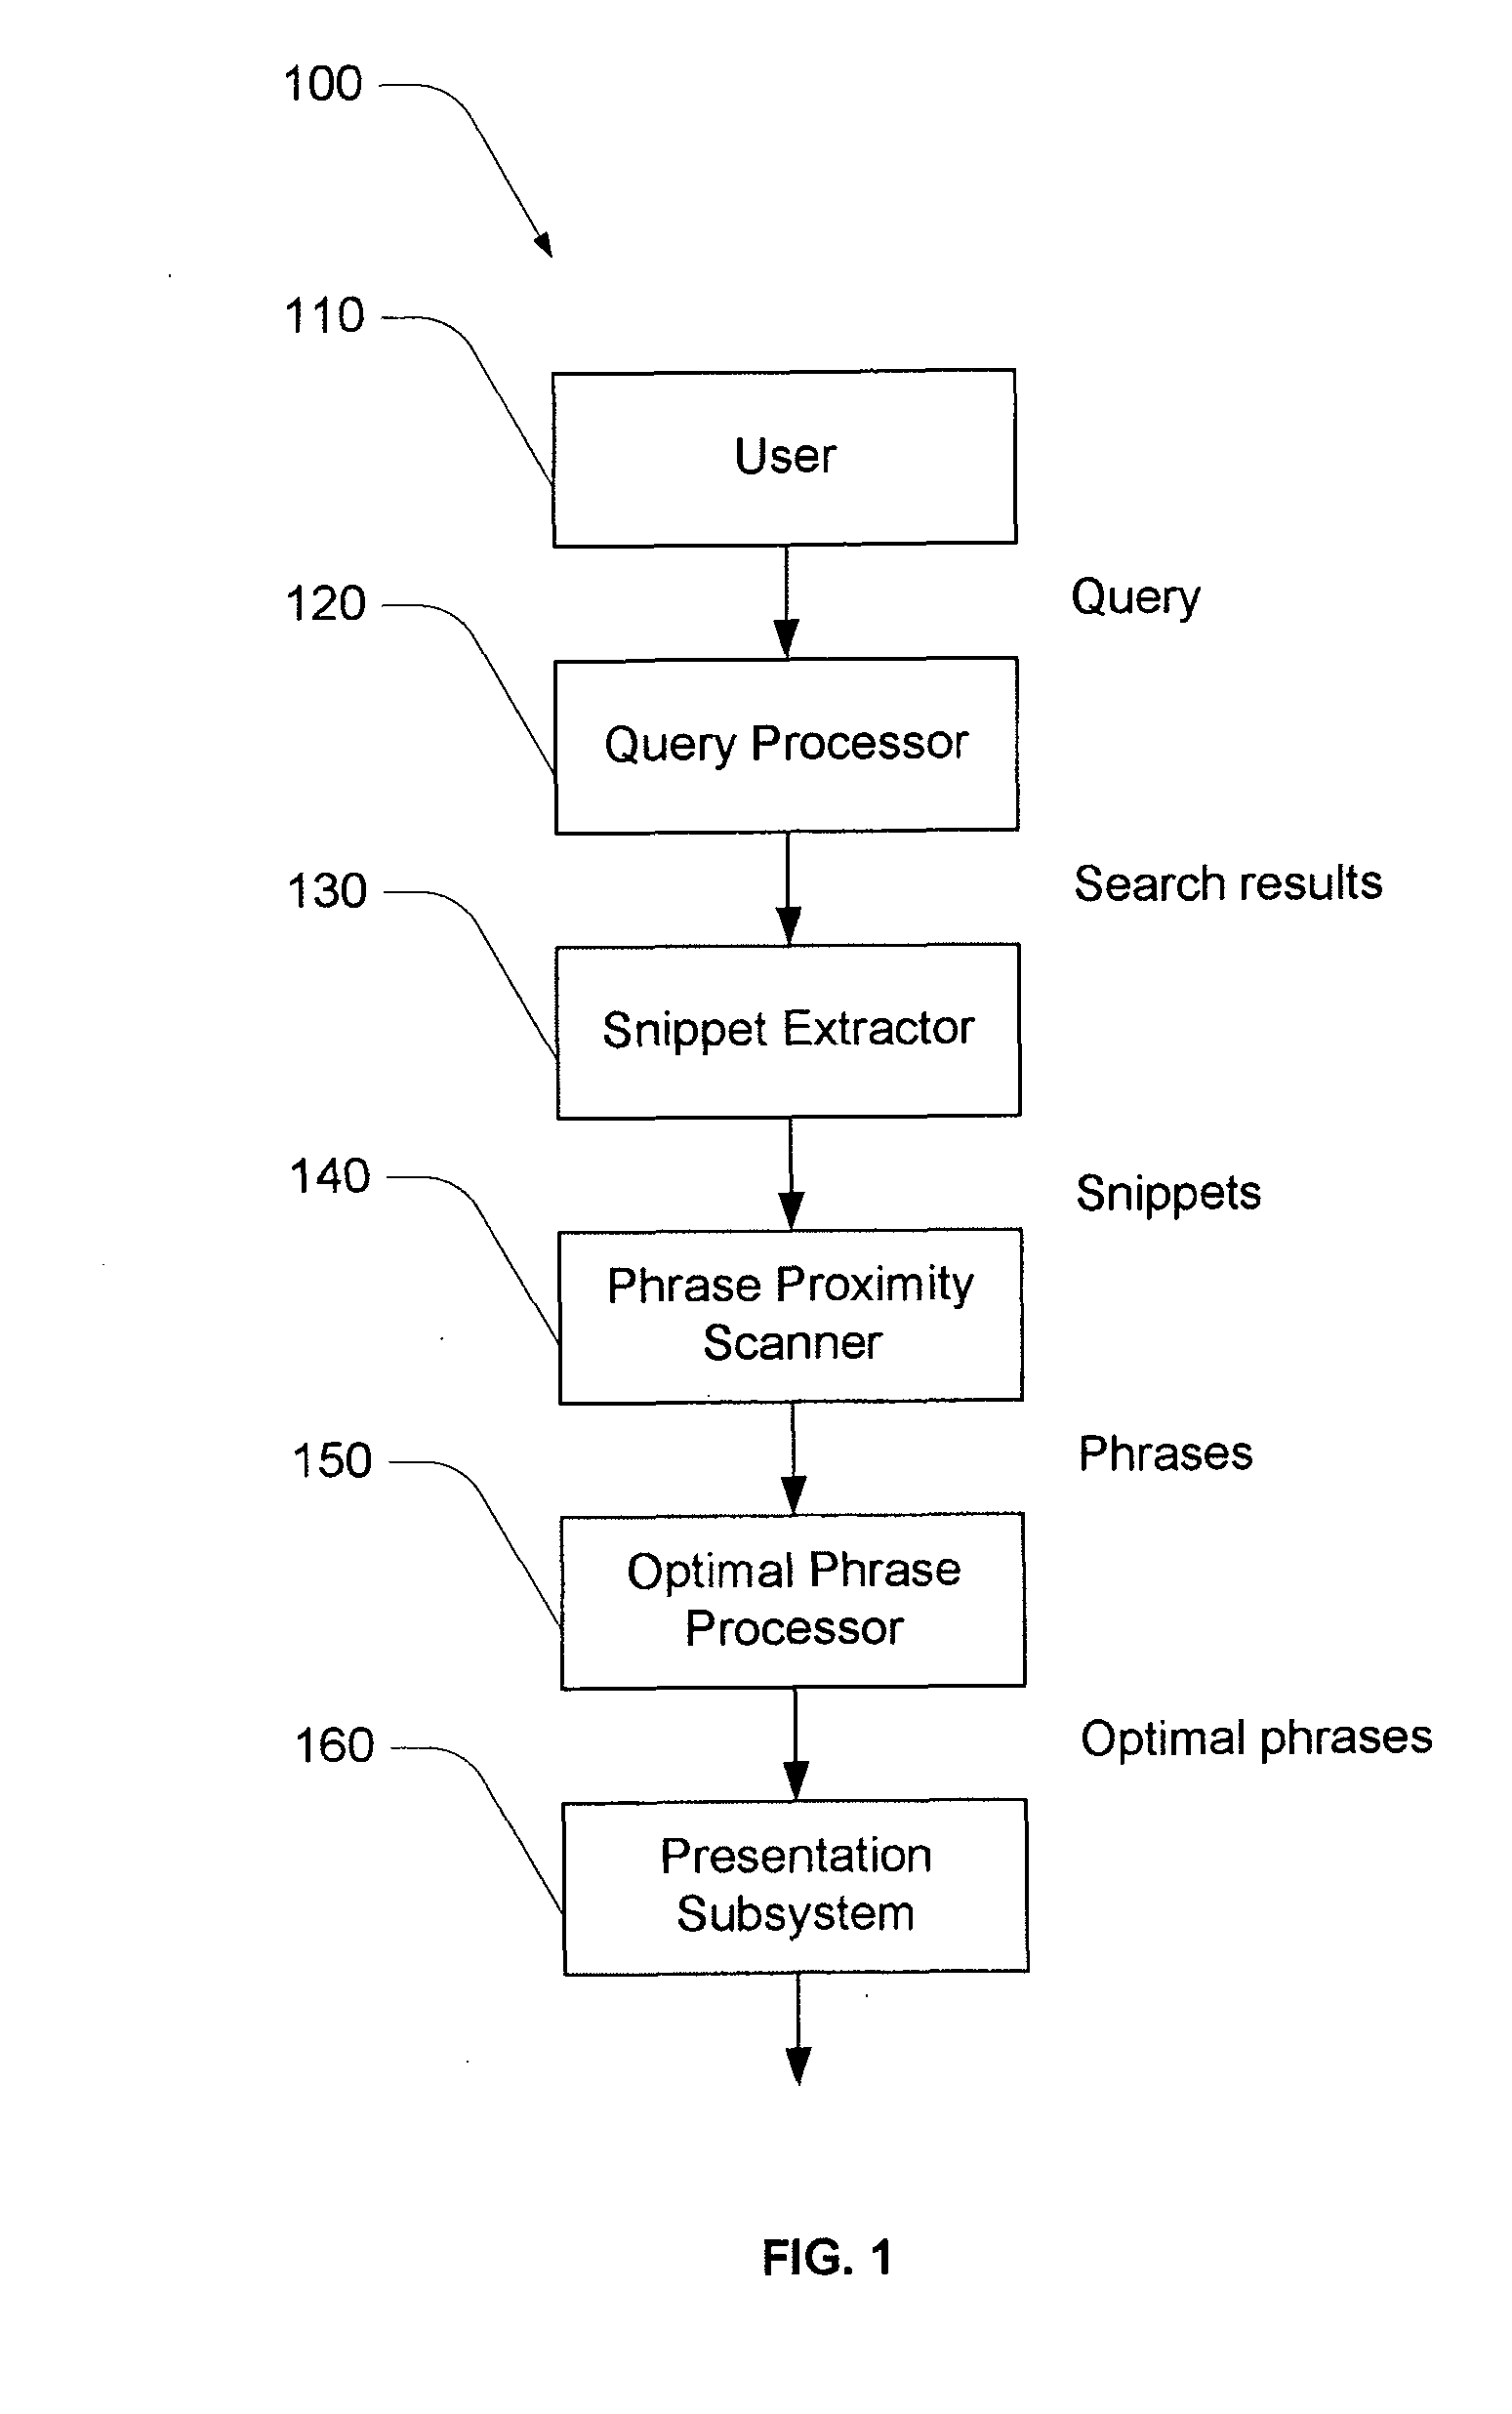 Search result sub-topic identification system and method